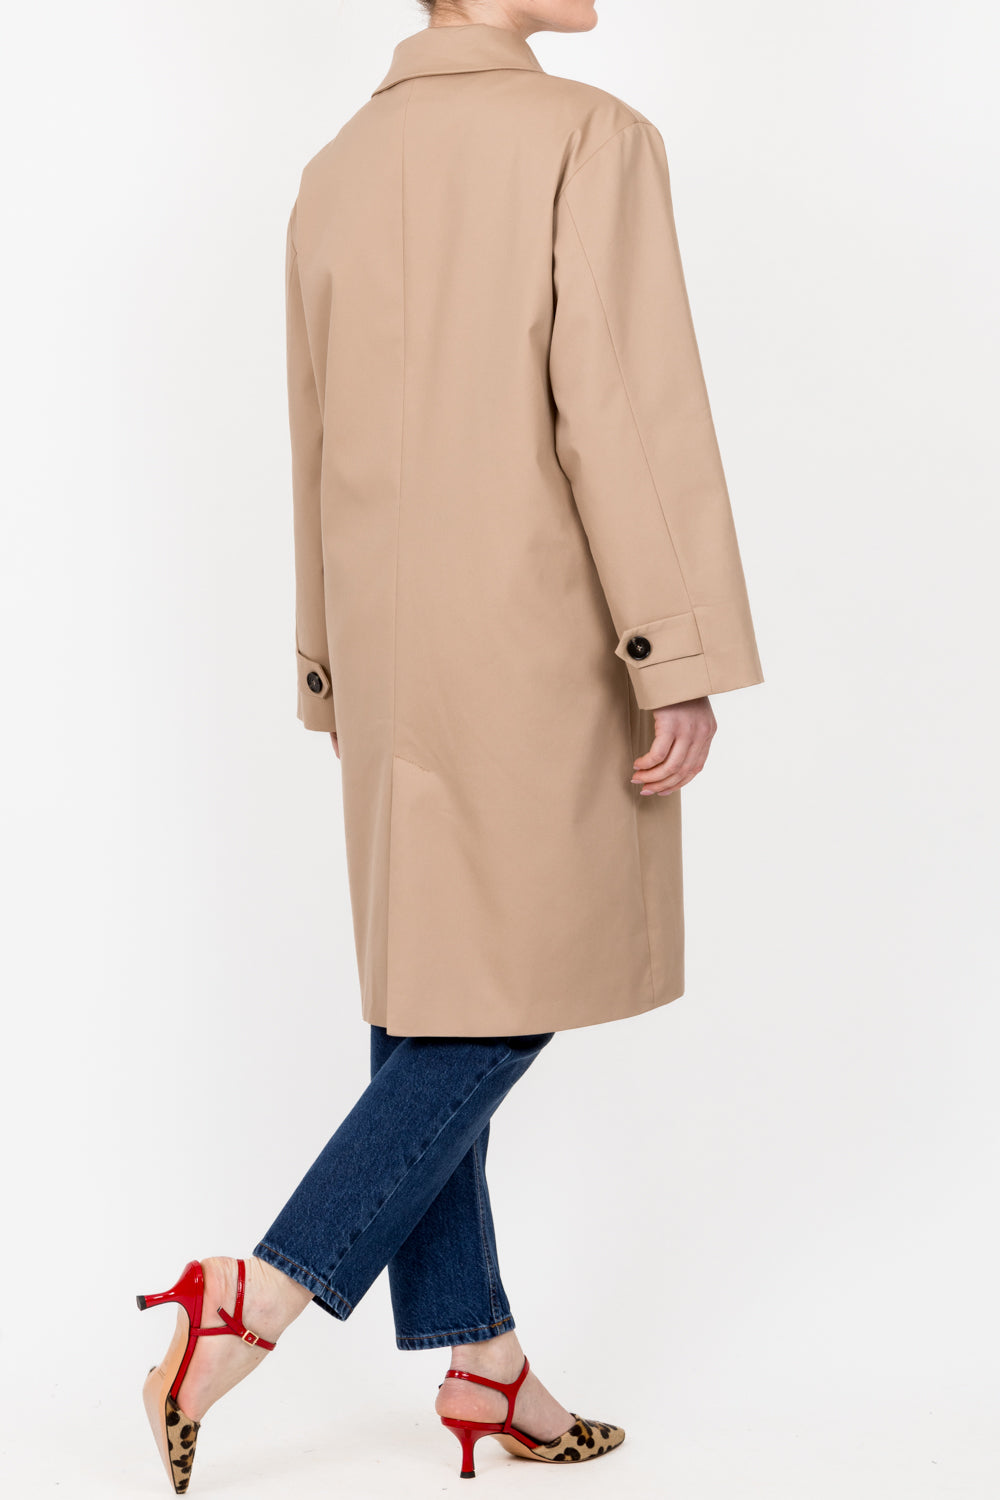 Imperial - Cappotto Trench lungo Art. KI45HLJ